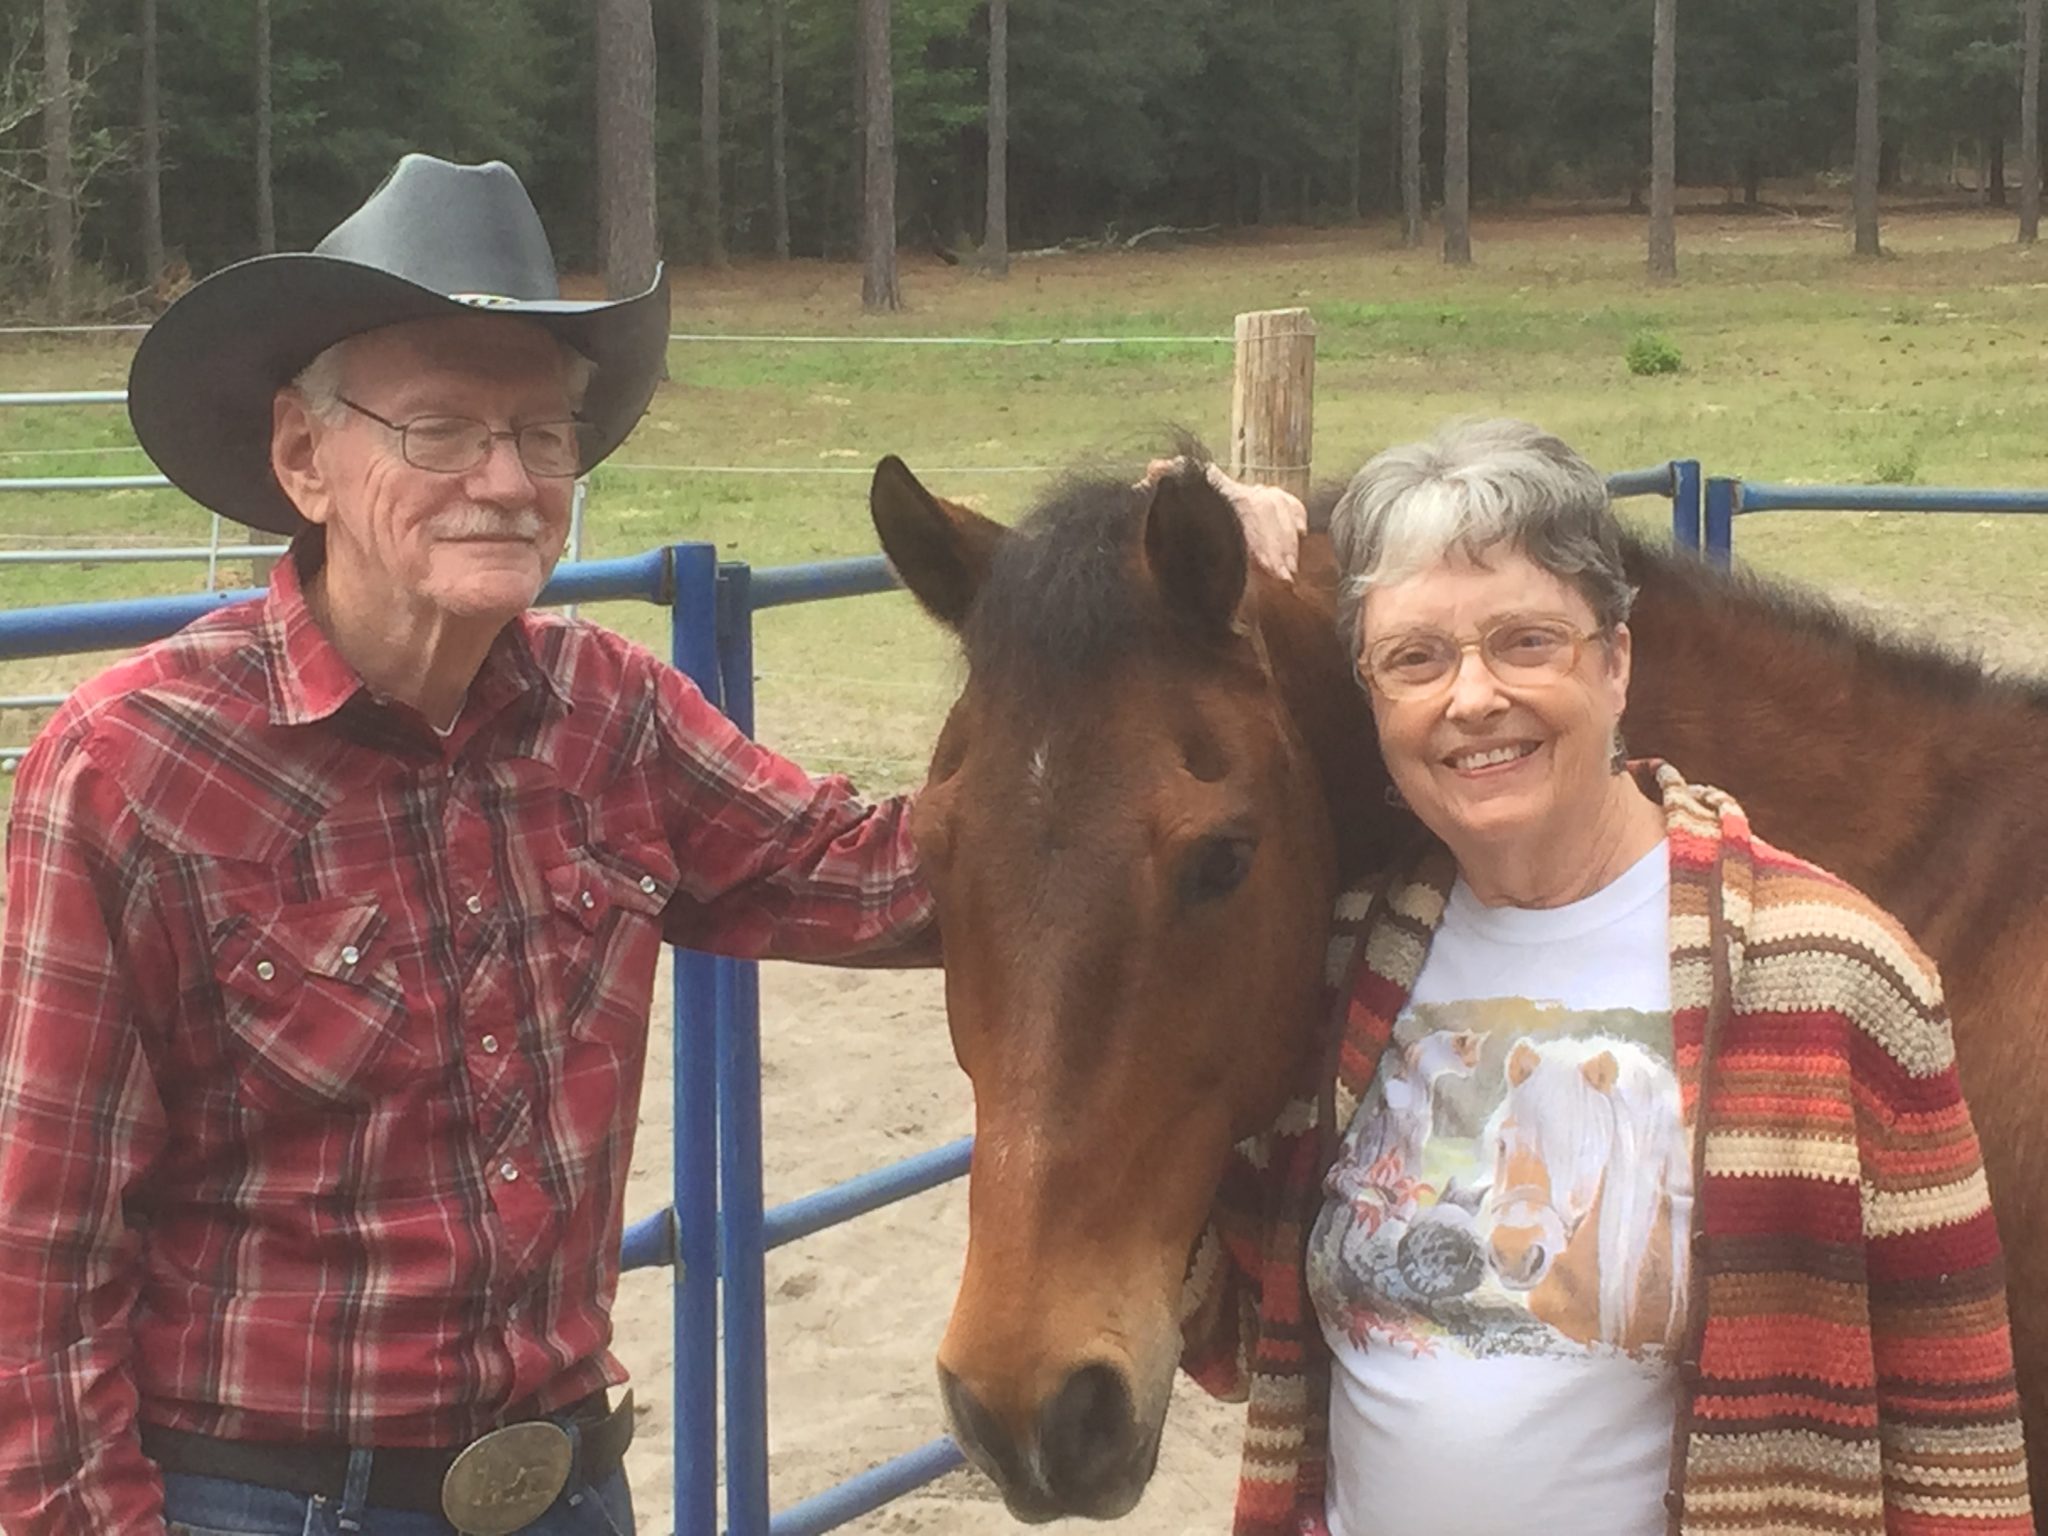 Paco with Dick and Diane. Thank you for sharing the love of Paco.